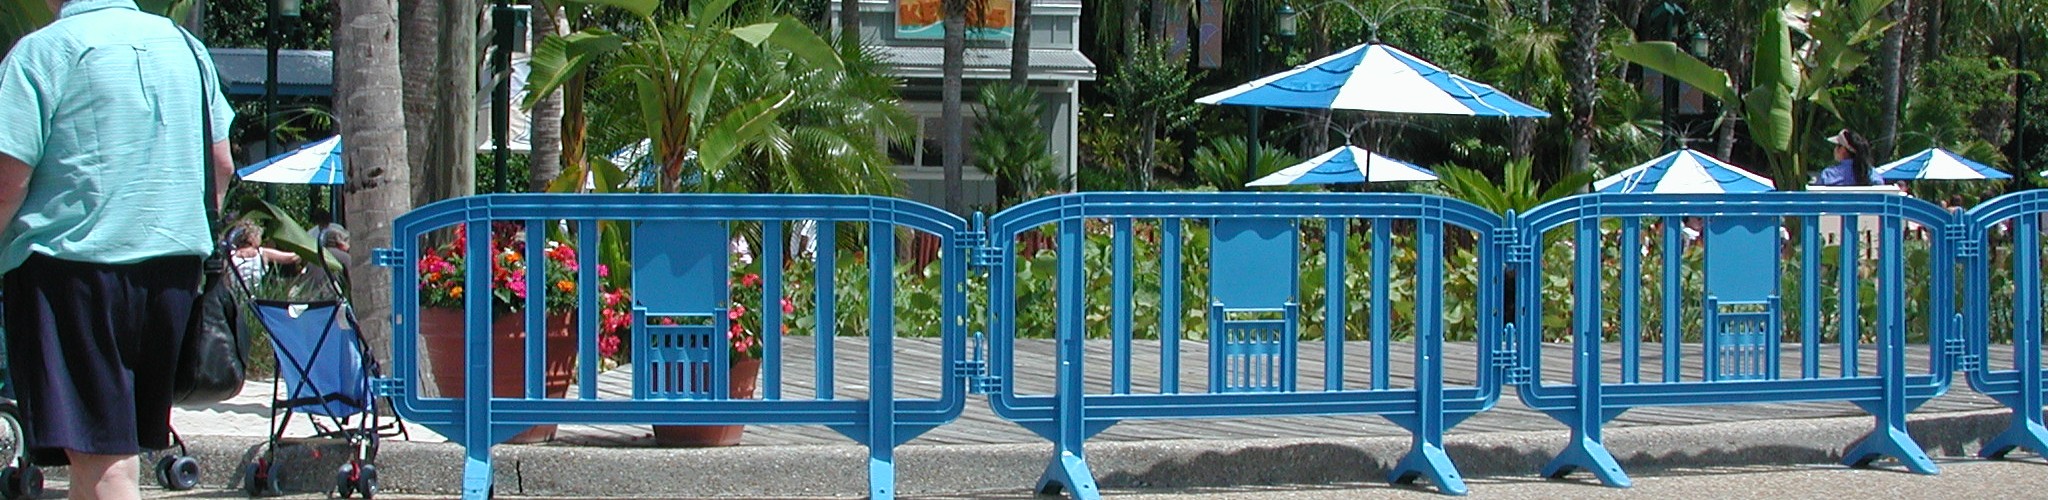 Blue Plastic Crowd Control Barriers.